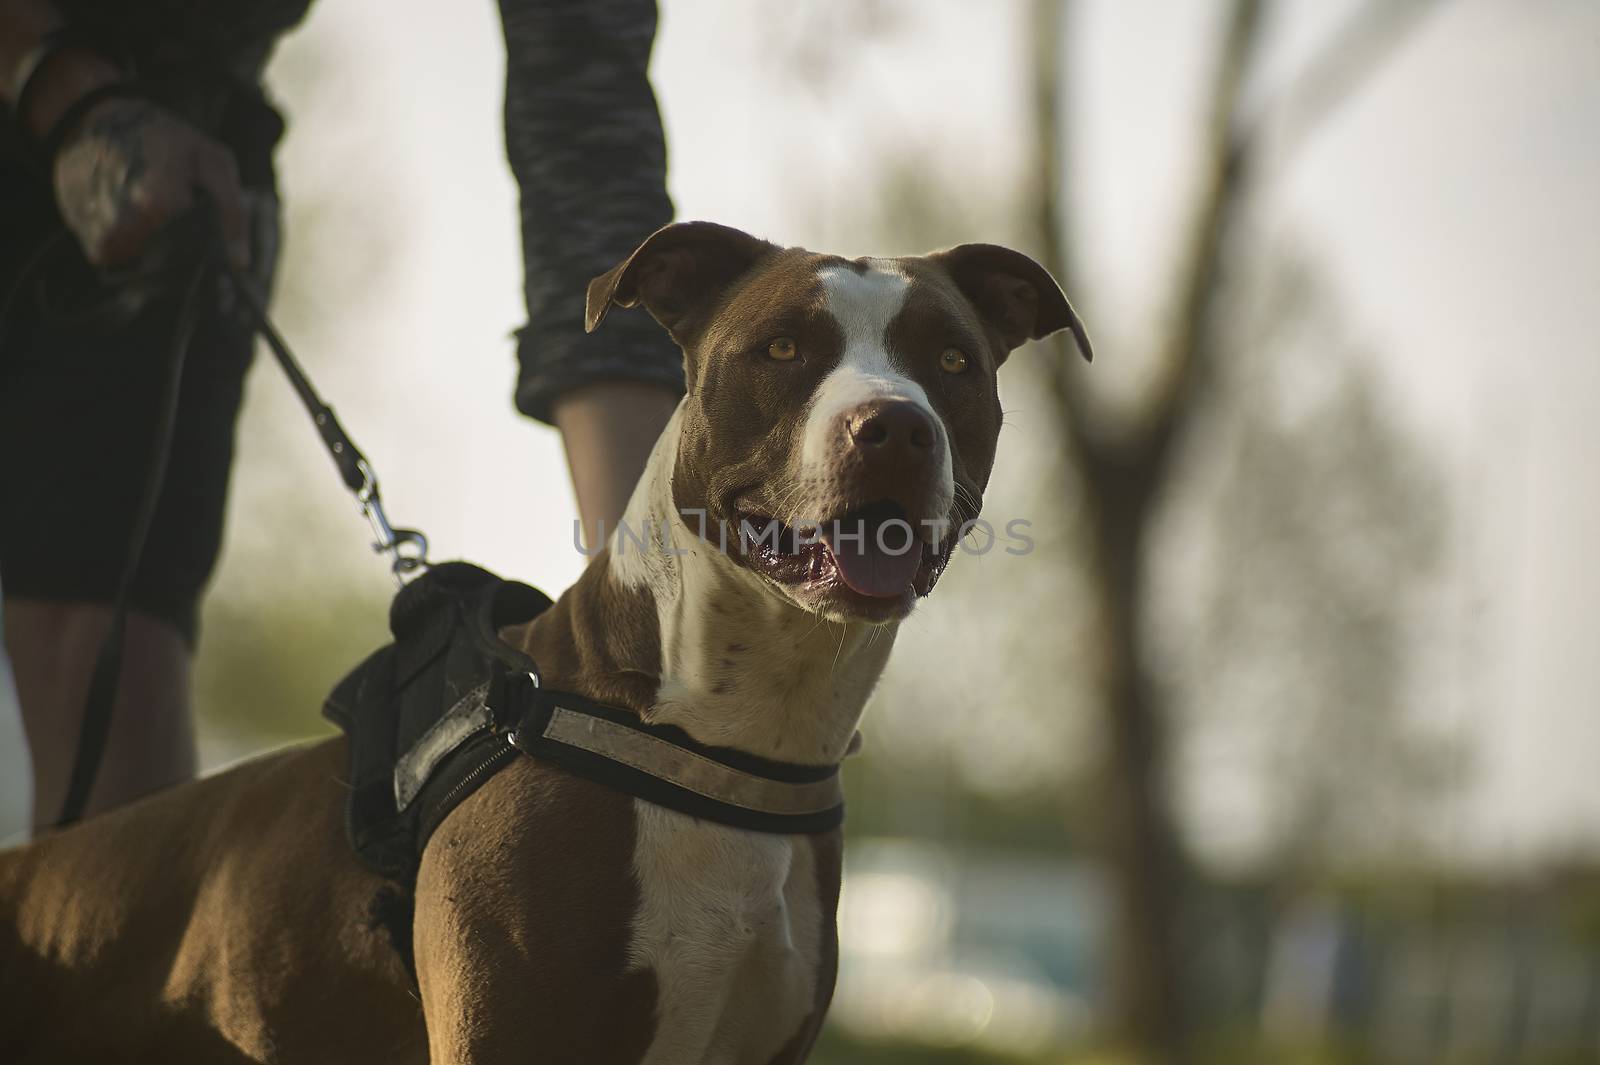 A great example of a rottweiler dog during a leash training with his chin. Dog look.